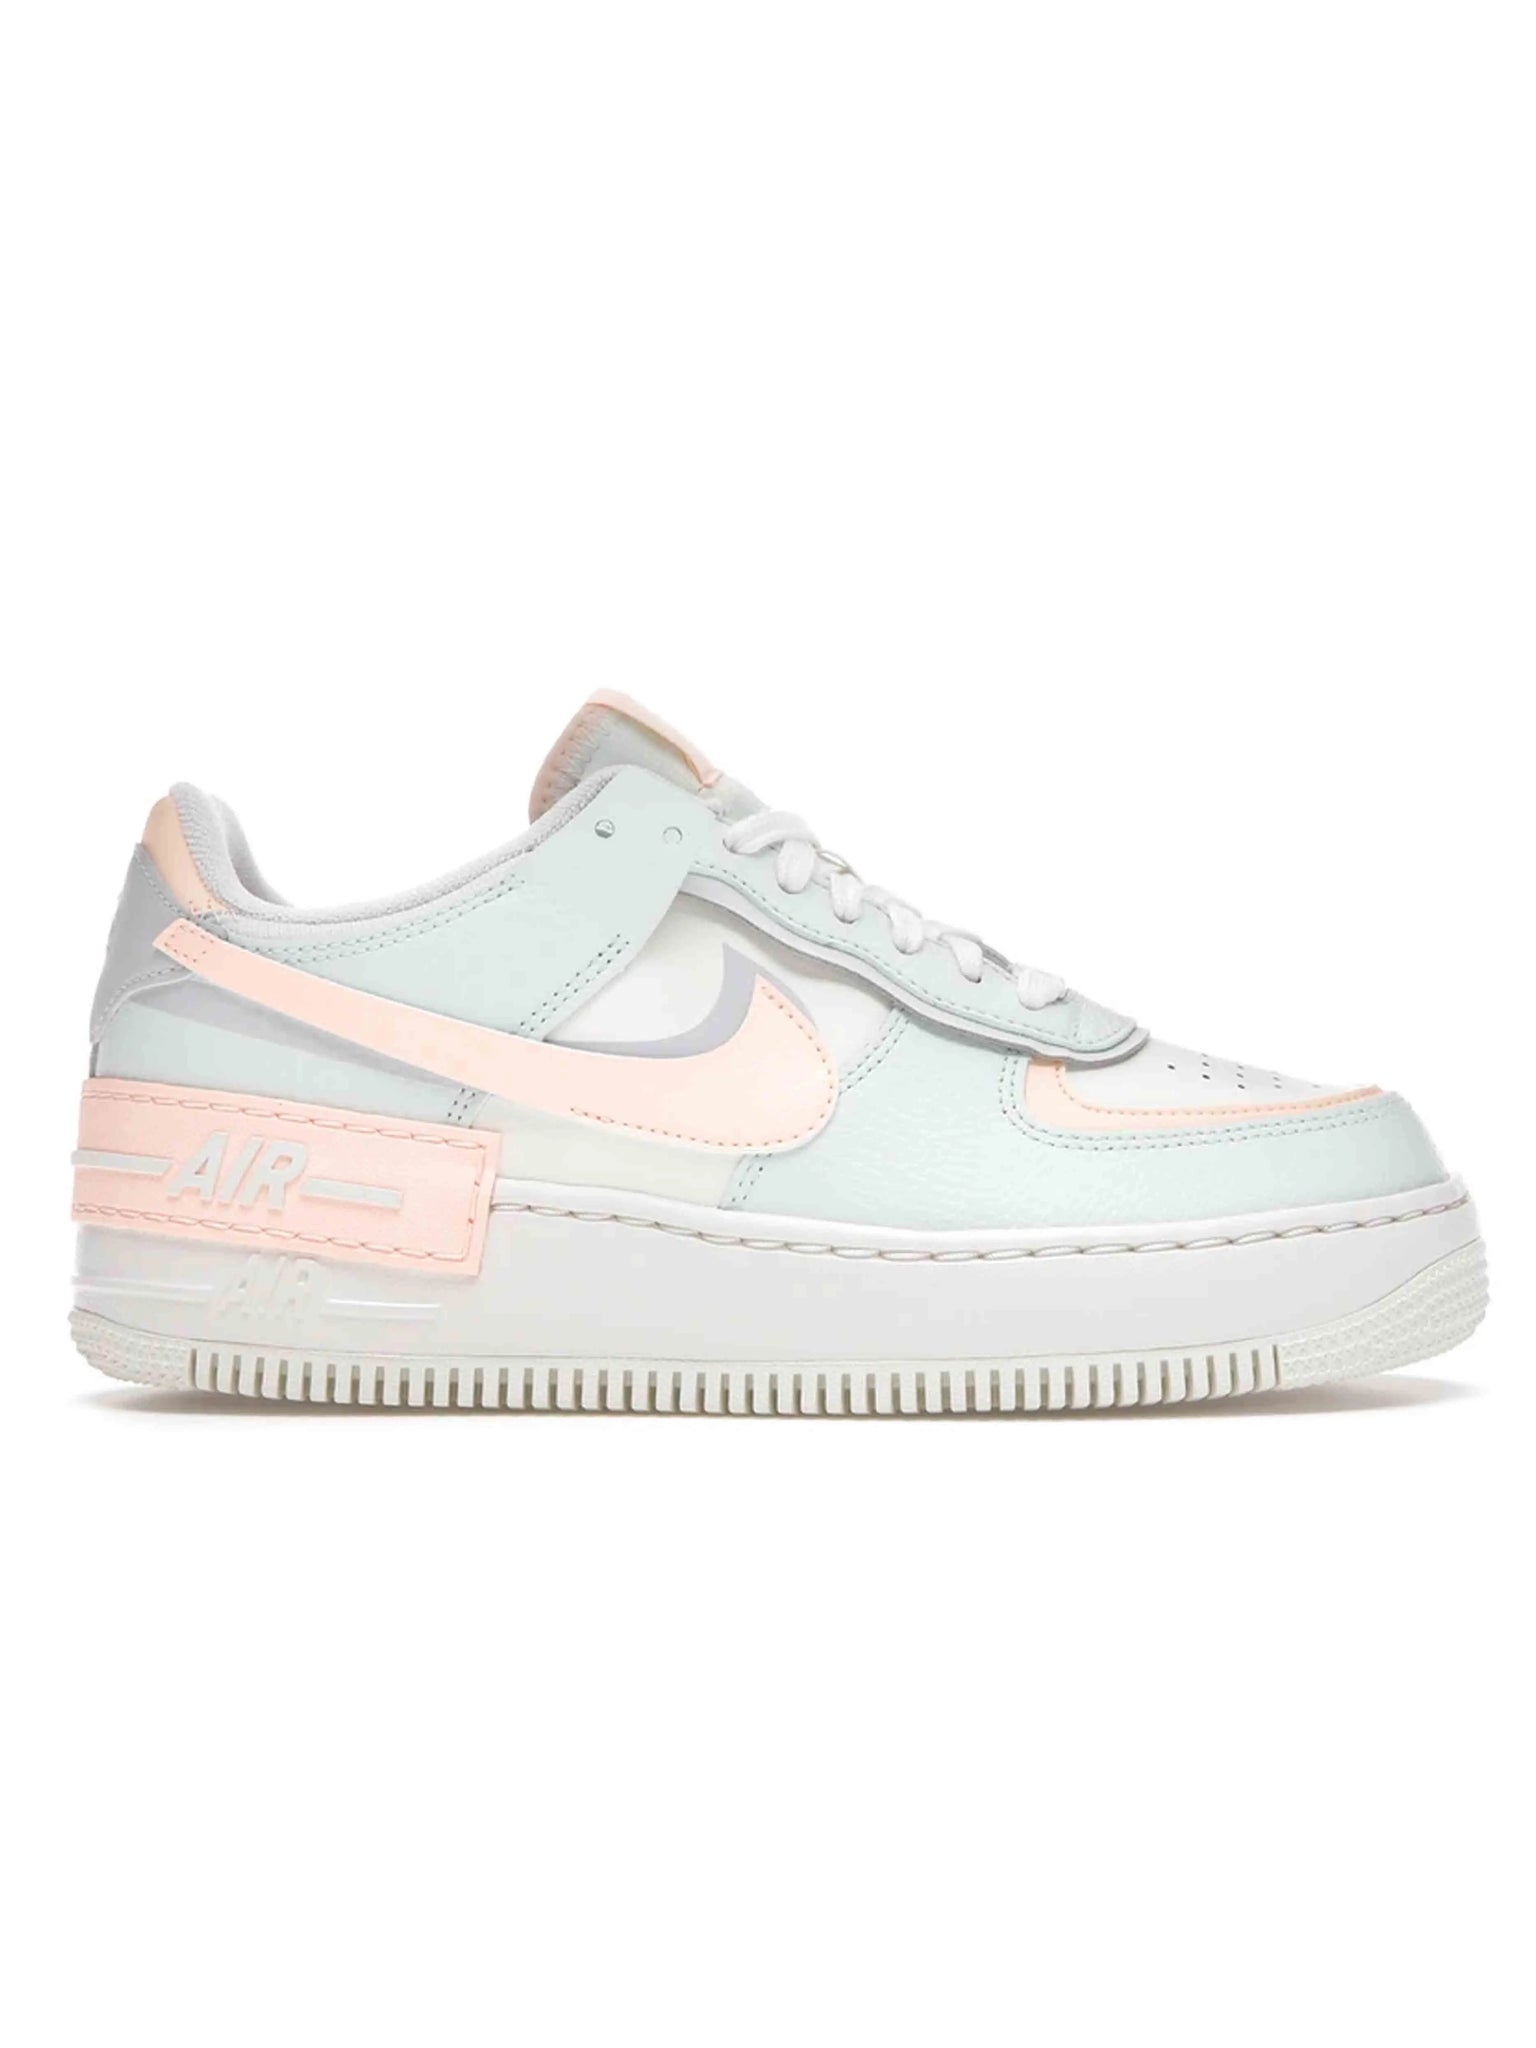 Nike Air Force 1 Shadow Sail Barely Green [W] Prior